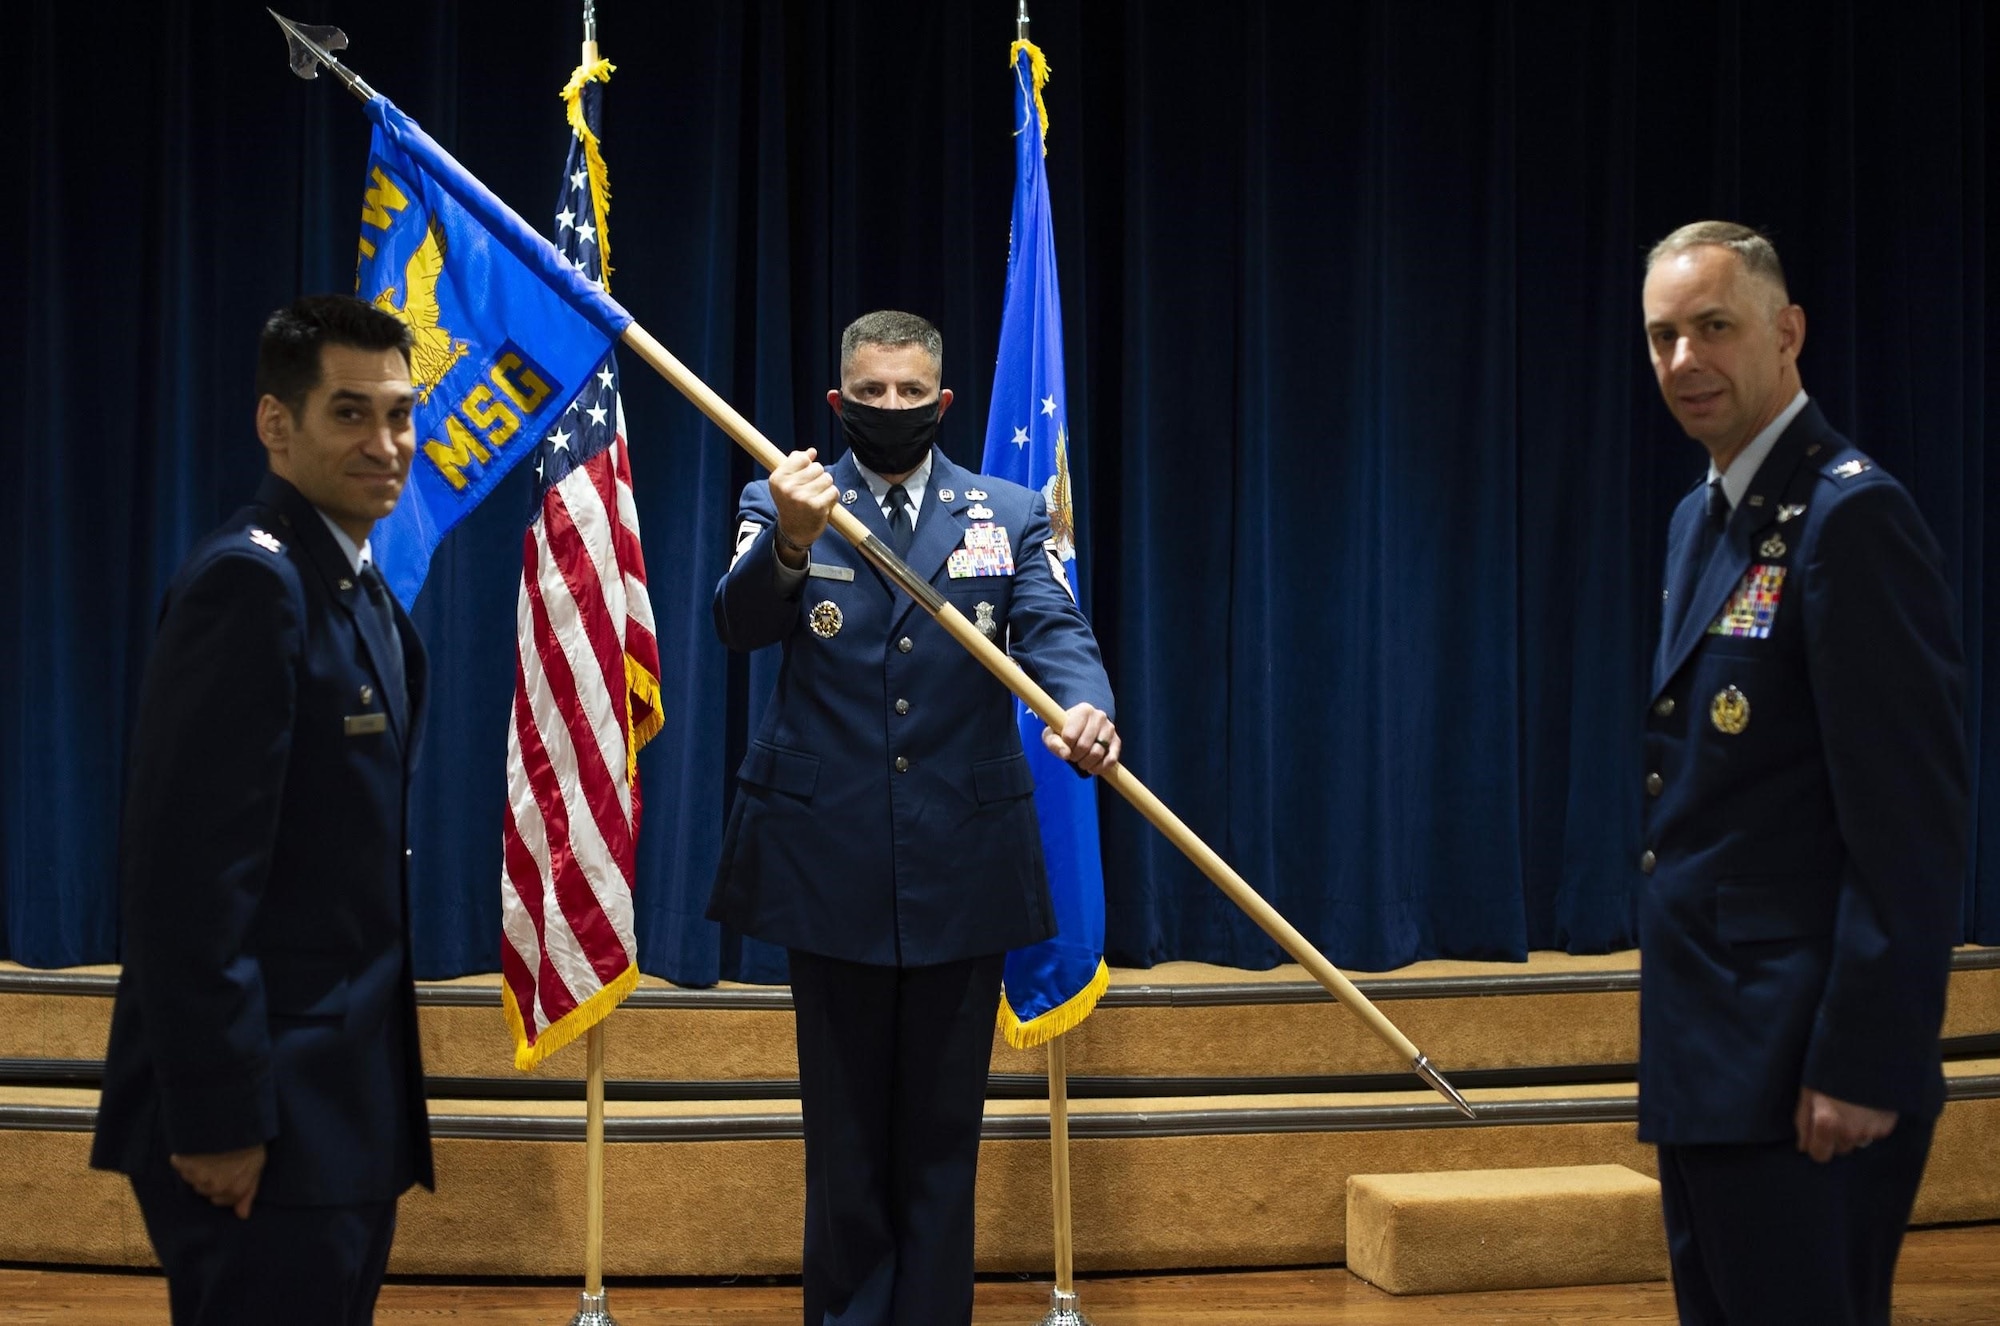 U.S. Air Force Col. Benjamin Robins, 6th Air Refueling Wing commander, ceremoniously passes the 6th Mission Support Group (MSG) guidon to Col. Jason Loschinskey, the in-coming 6th MSG commander during a change of command ceremony at MacDill Air Force Base, Fla., June 24, 2020.